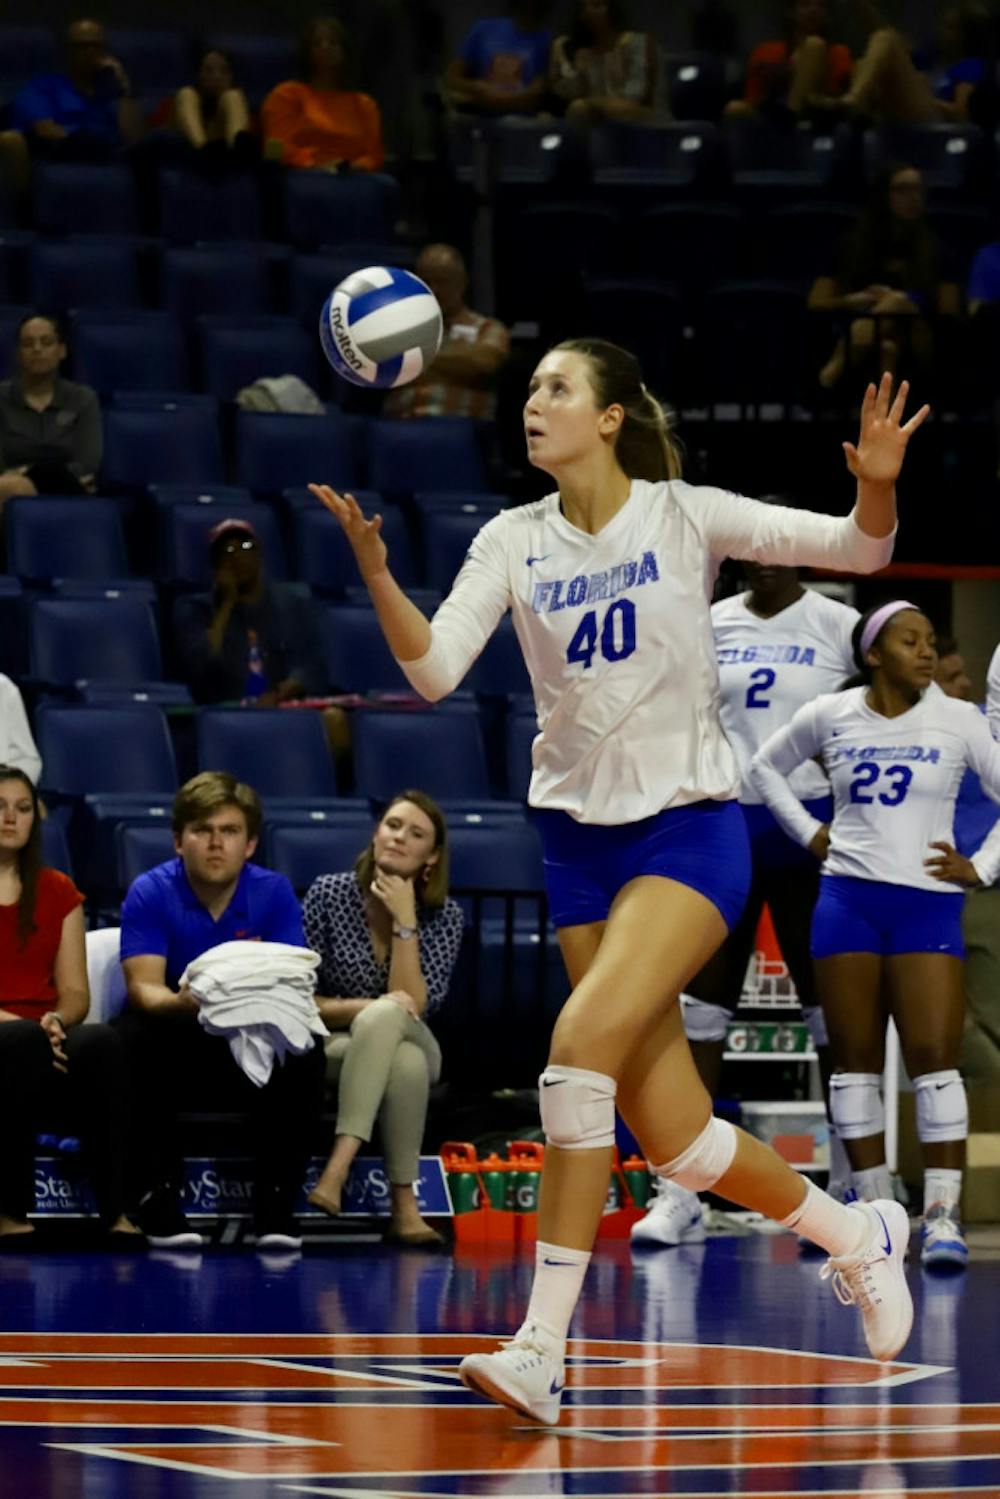 <p><span id="docs-internal-guid-500ce5d4-7fff-1e71-7ad4-748b7917342a"><span>Redshirt junior Holly Carlton is in a three-way tie for second on the roster with 19 kills so far this season.</span></span></p>